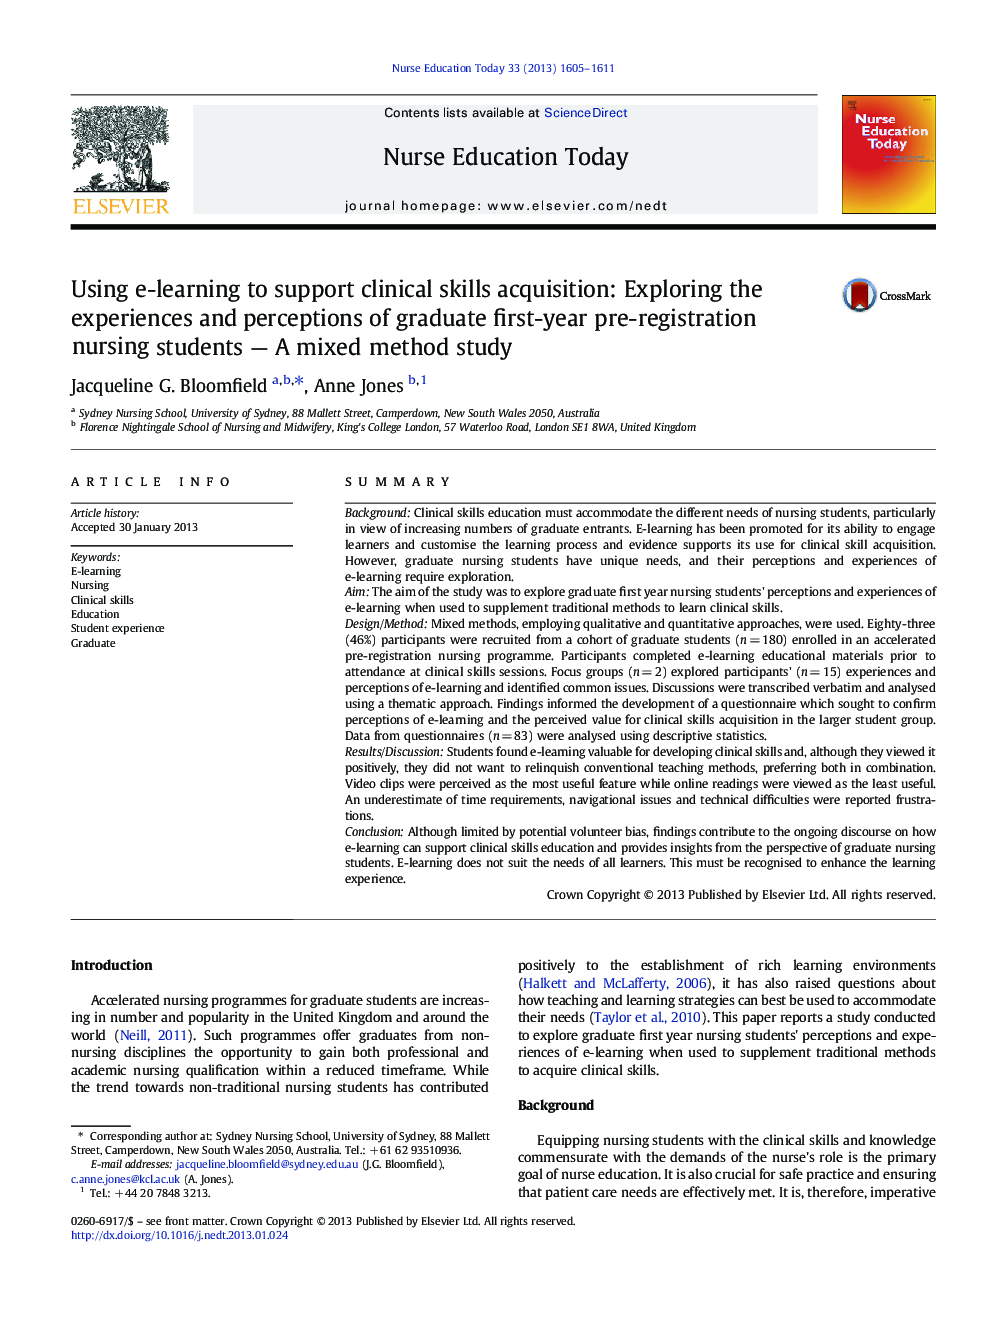 Using e-learning to support clinical skills acquisition: Exploring the experiences and perceptions of graduate first-year pre-registration nursing students — A mixed method study